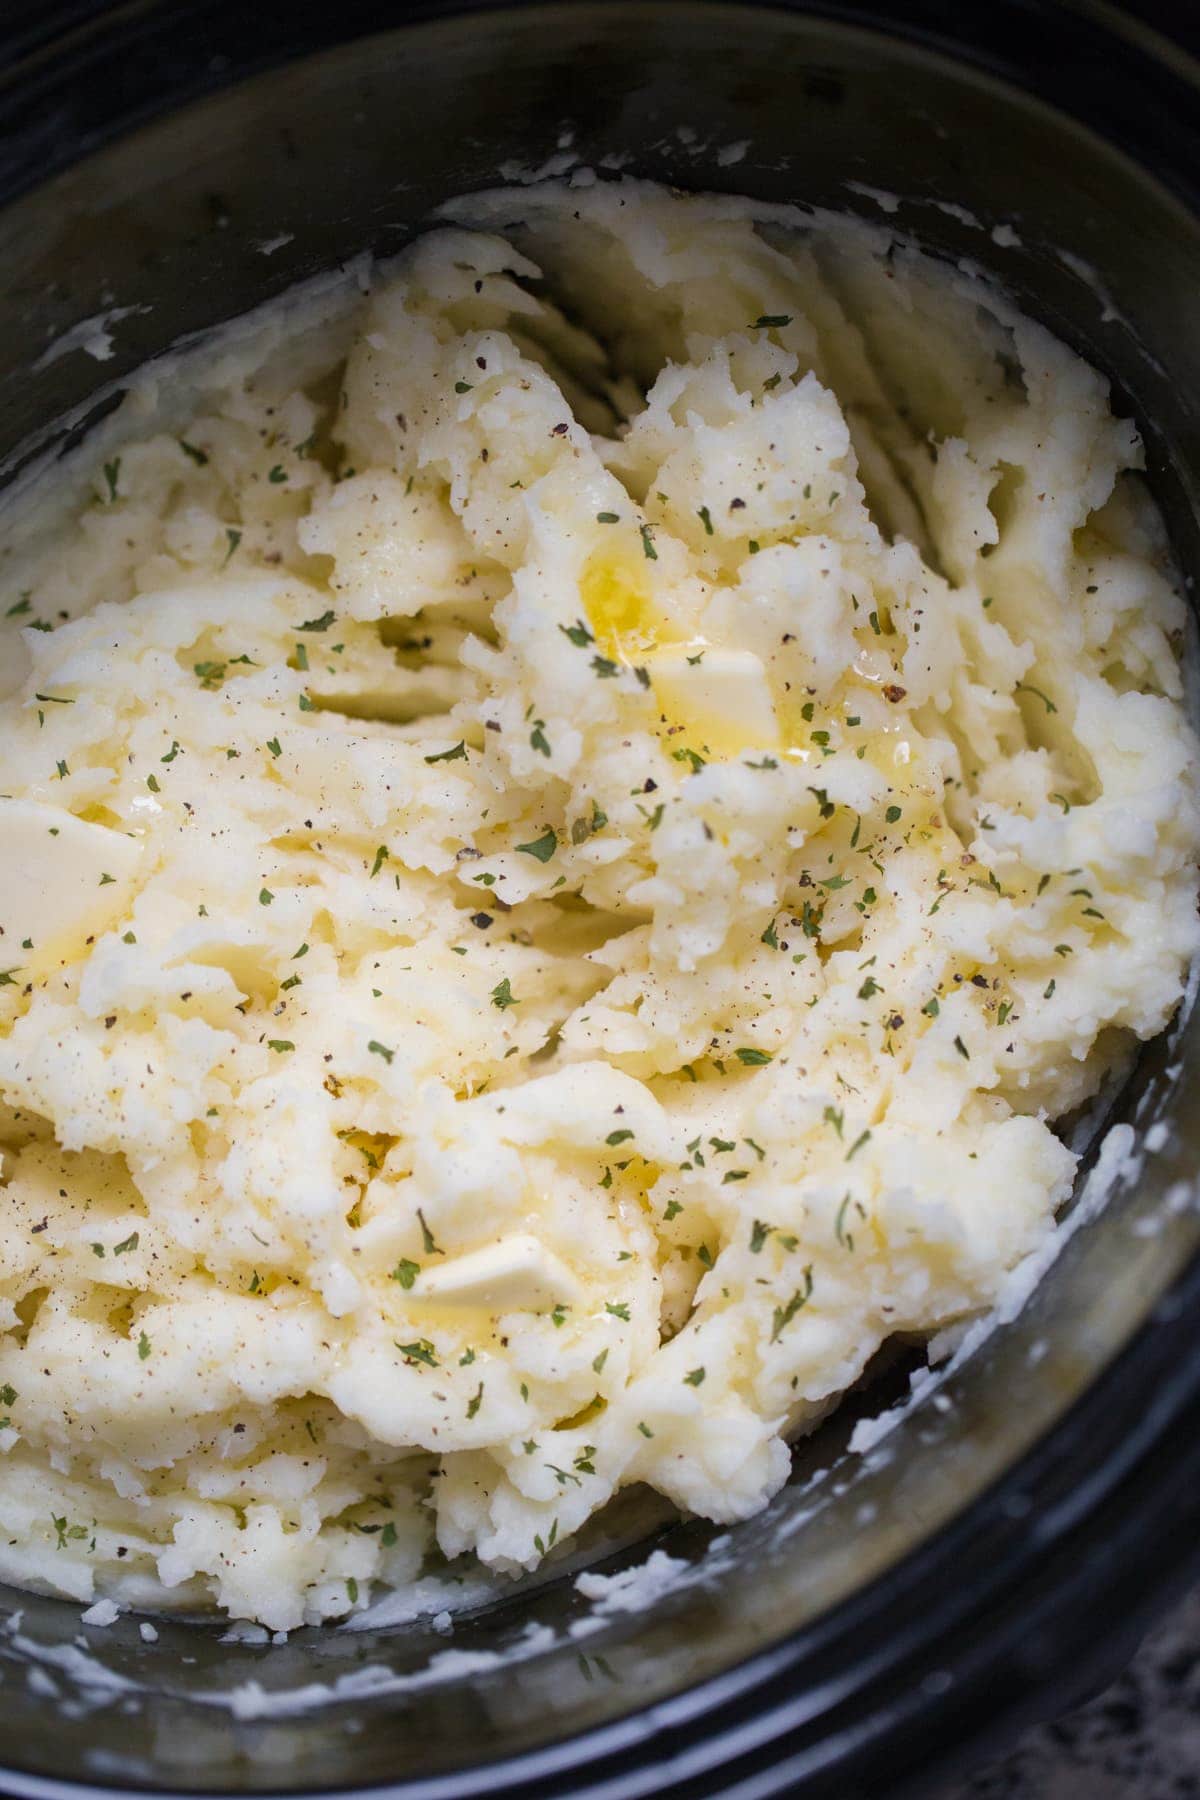 mashed potatoes in a crockpot with slices of melted butter and garnish